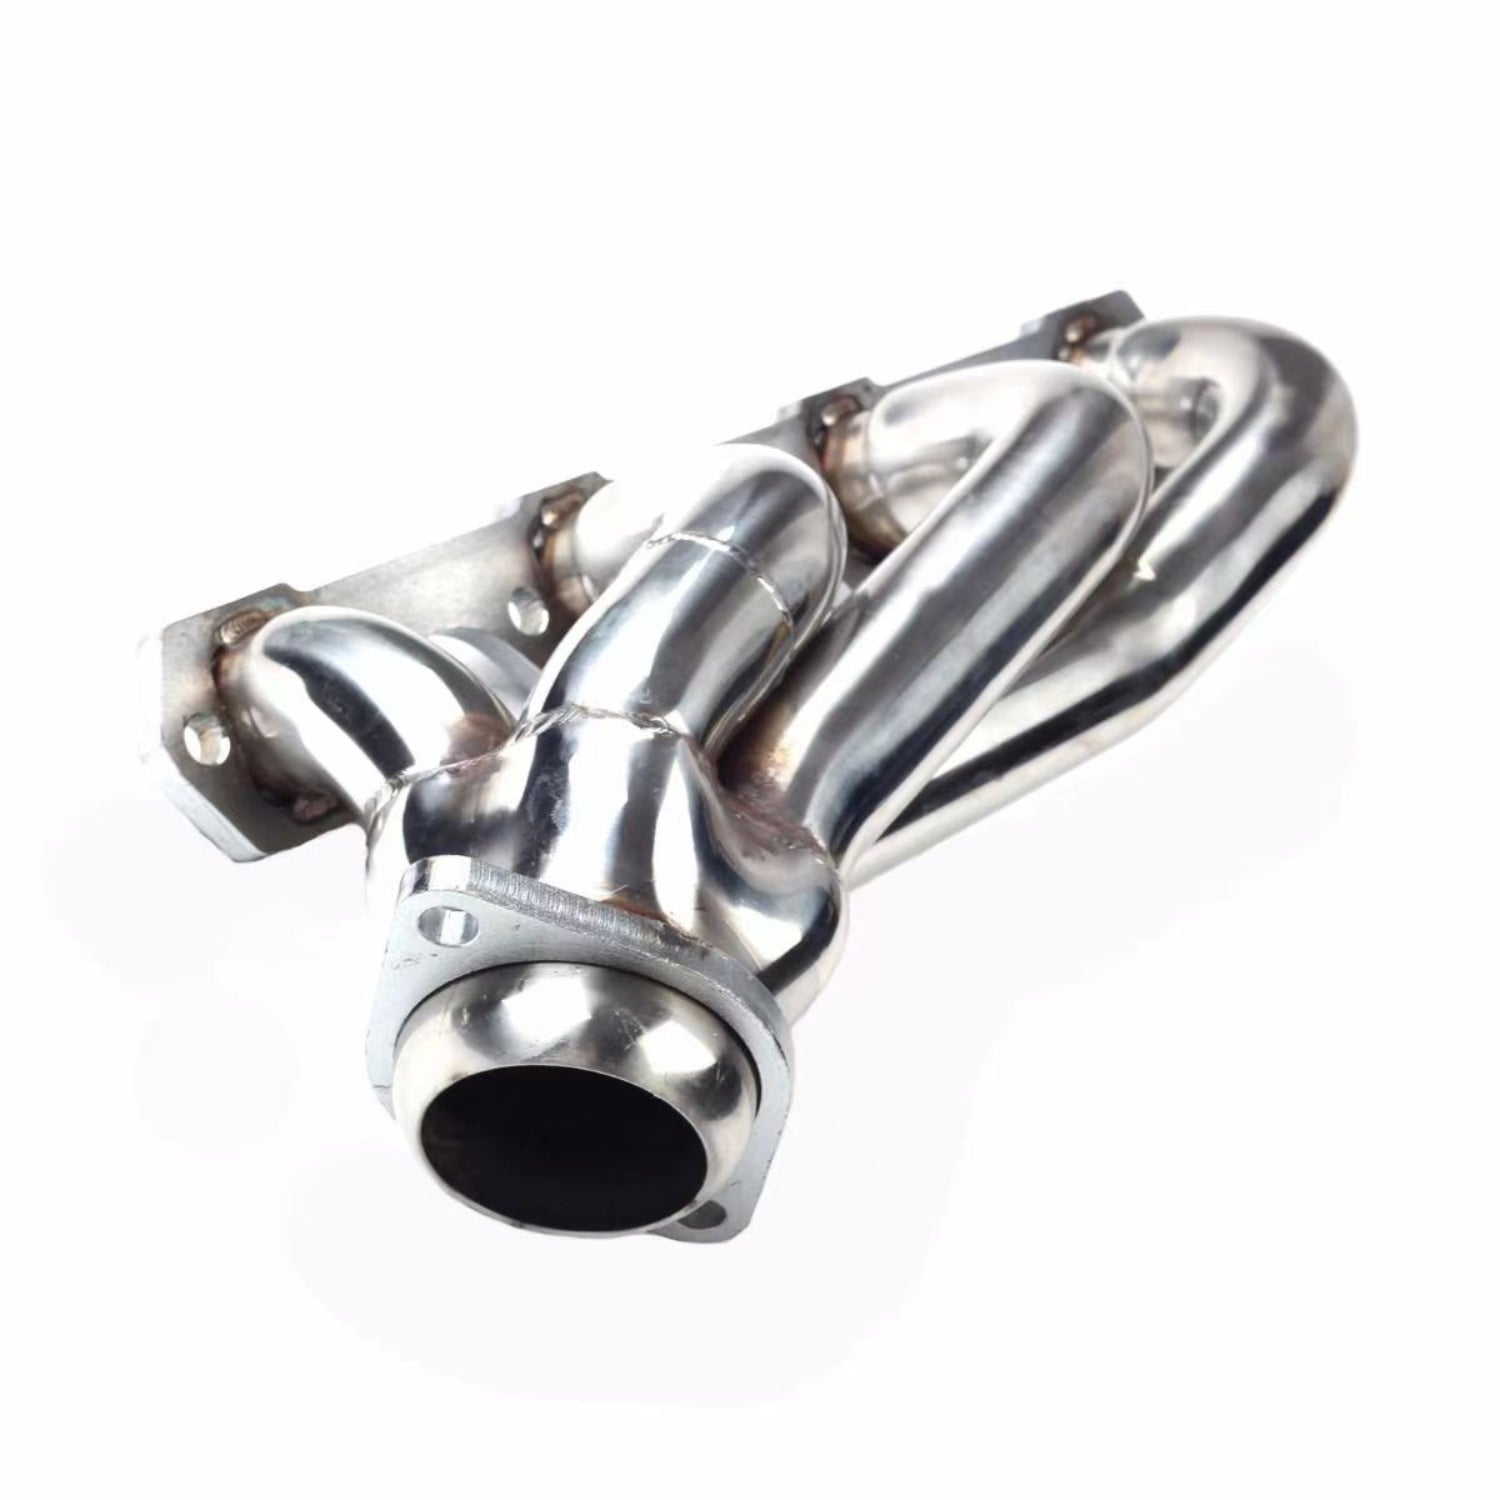 Exhaust Manifold Headers for Ford 1979-1993 Mustang 5.0 V8 GT/LX/SVT